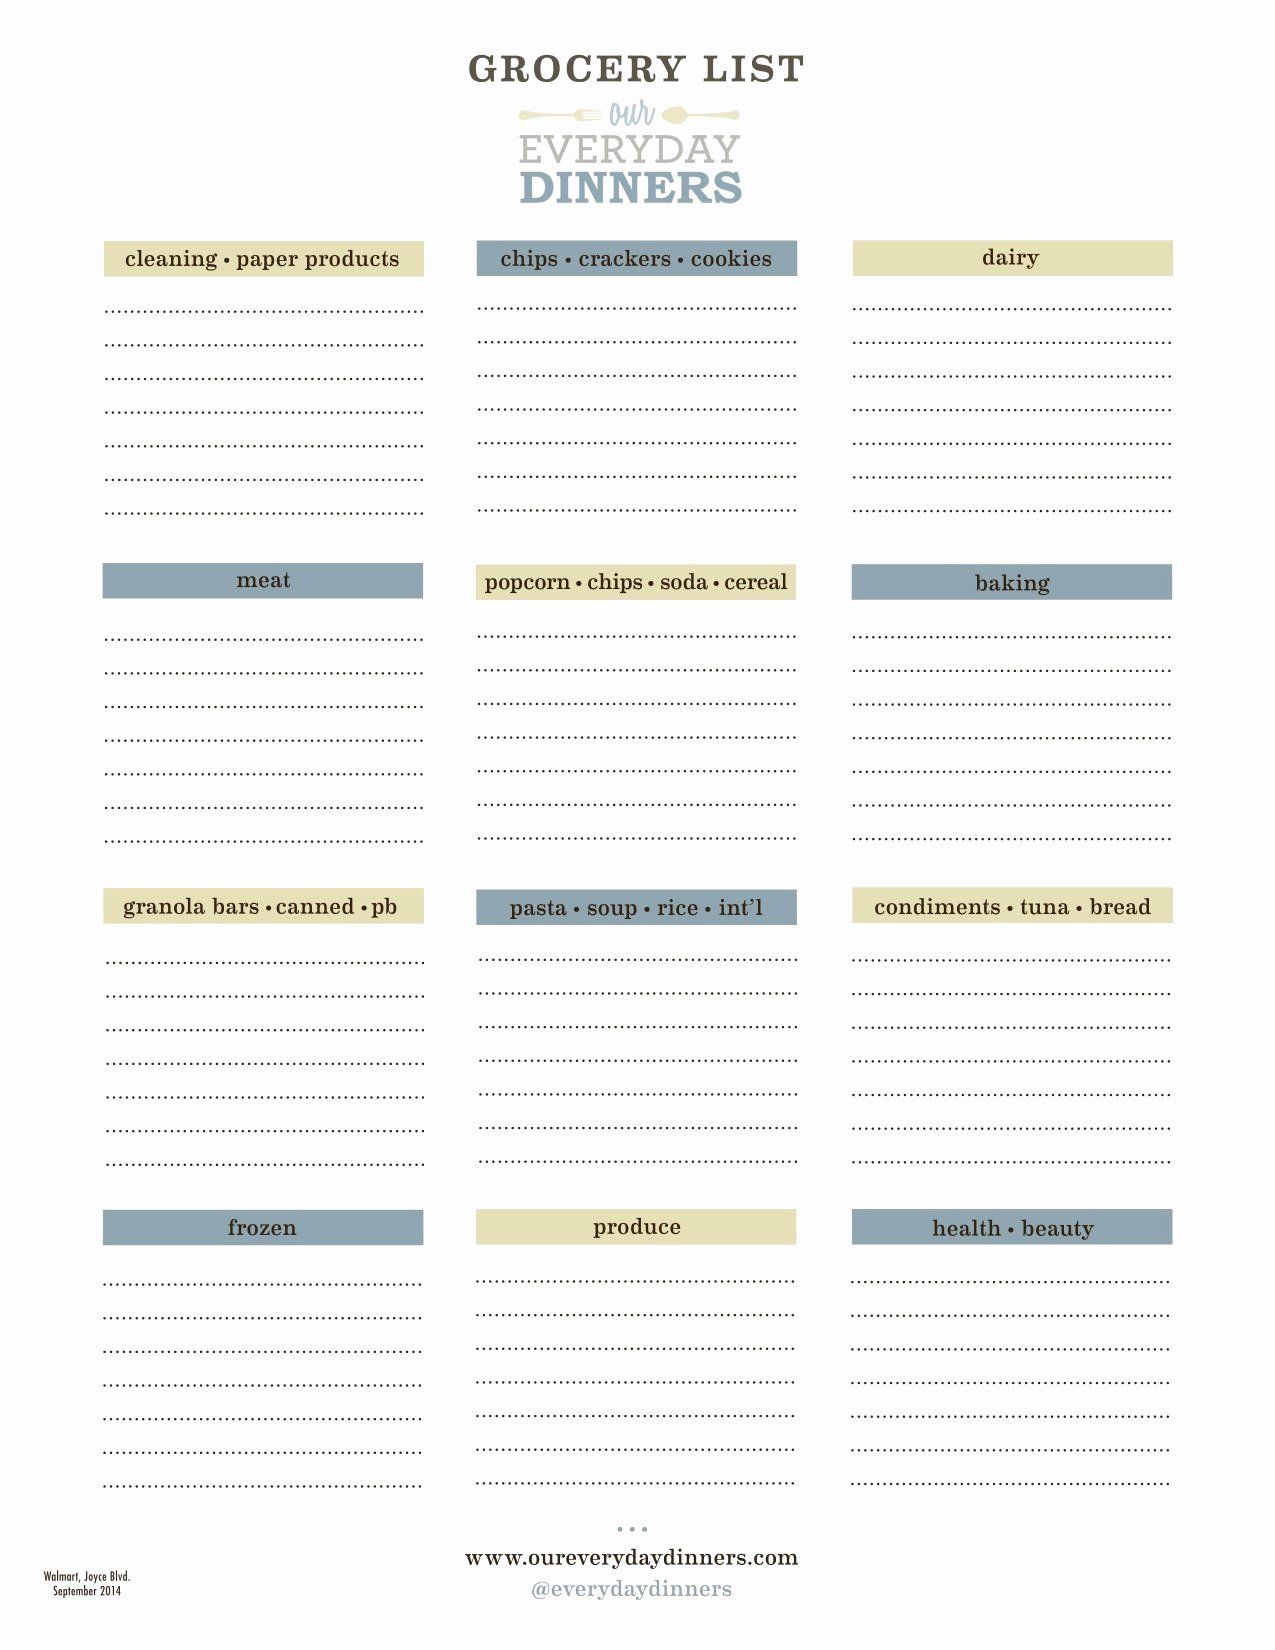 Walmart Grocery List Template Elegant Grocery Templates Free Image – Grocery Web Shop